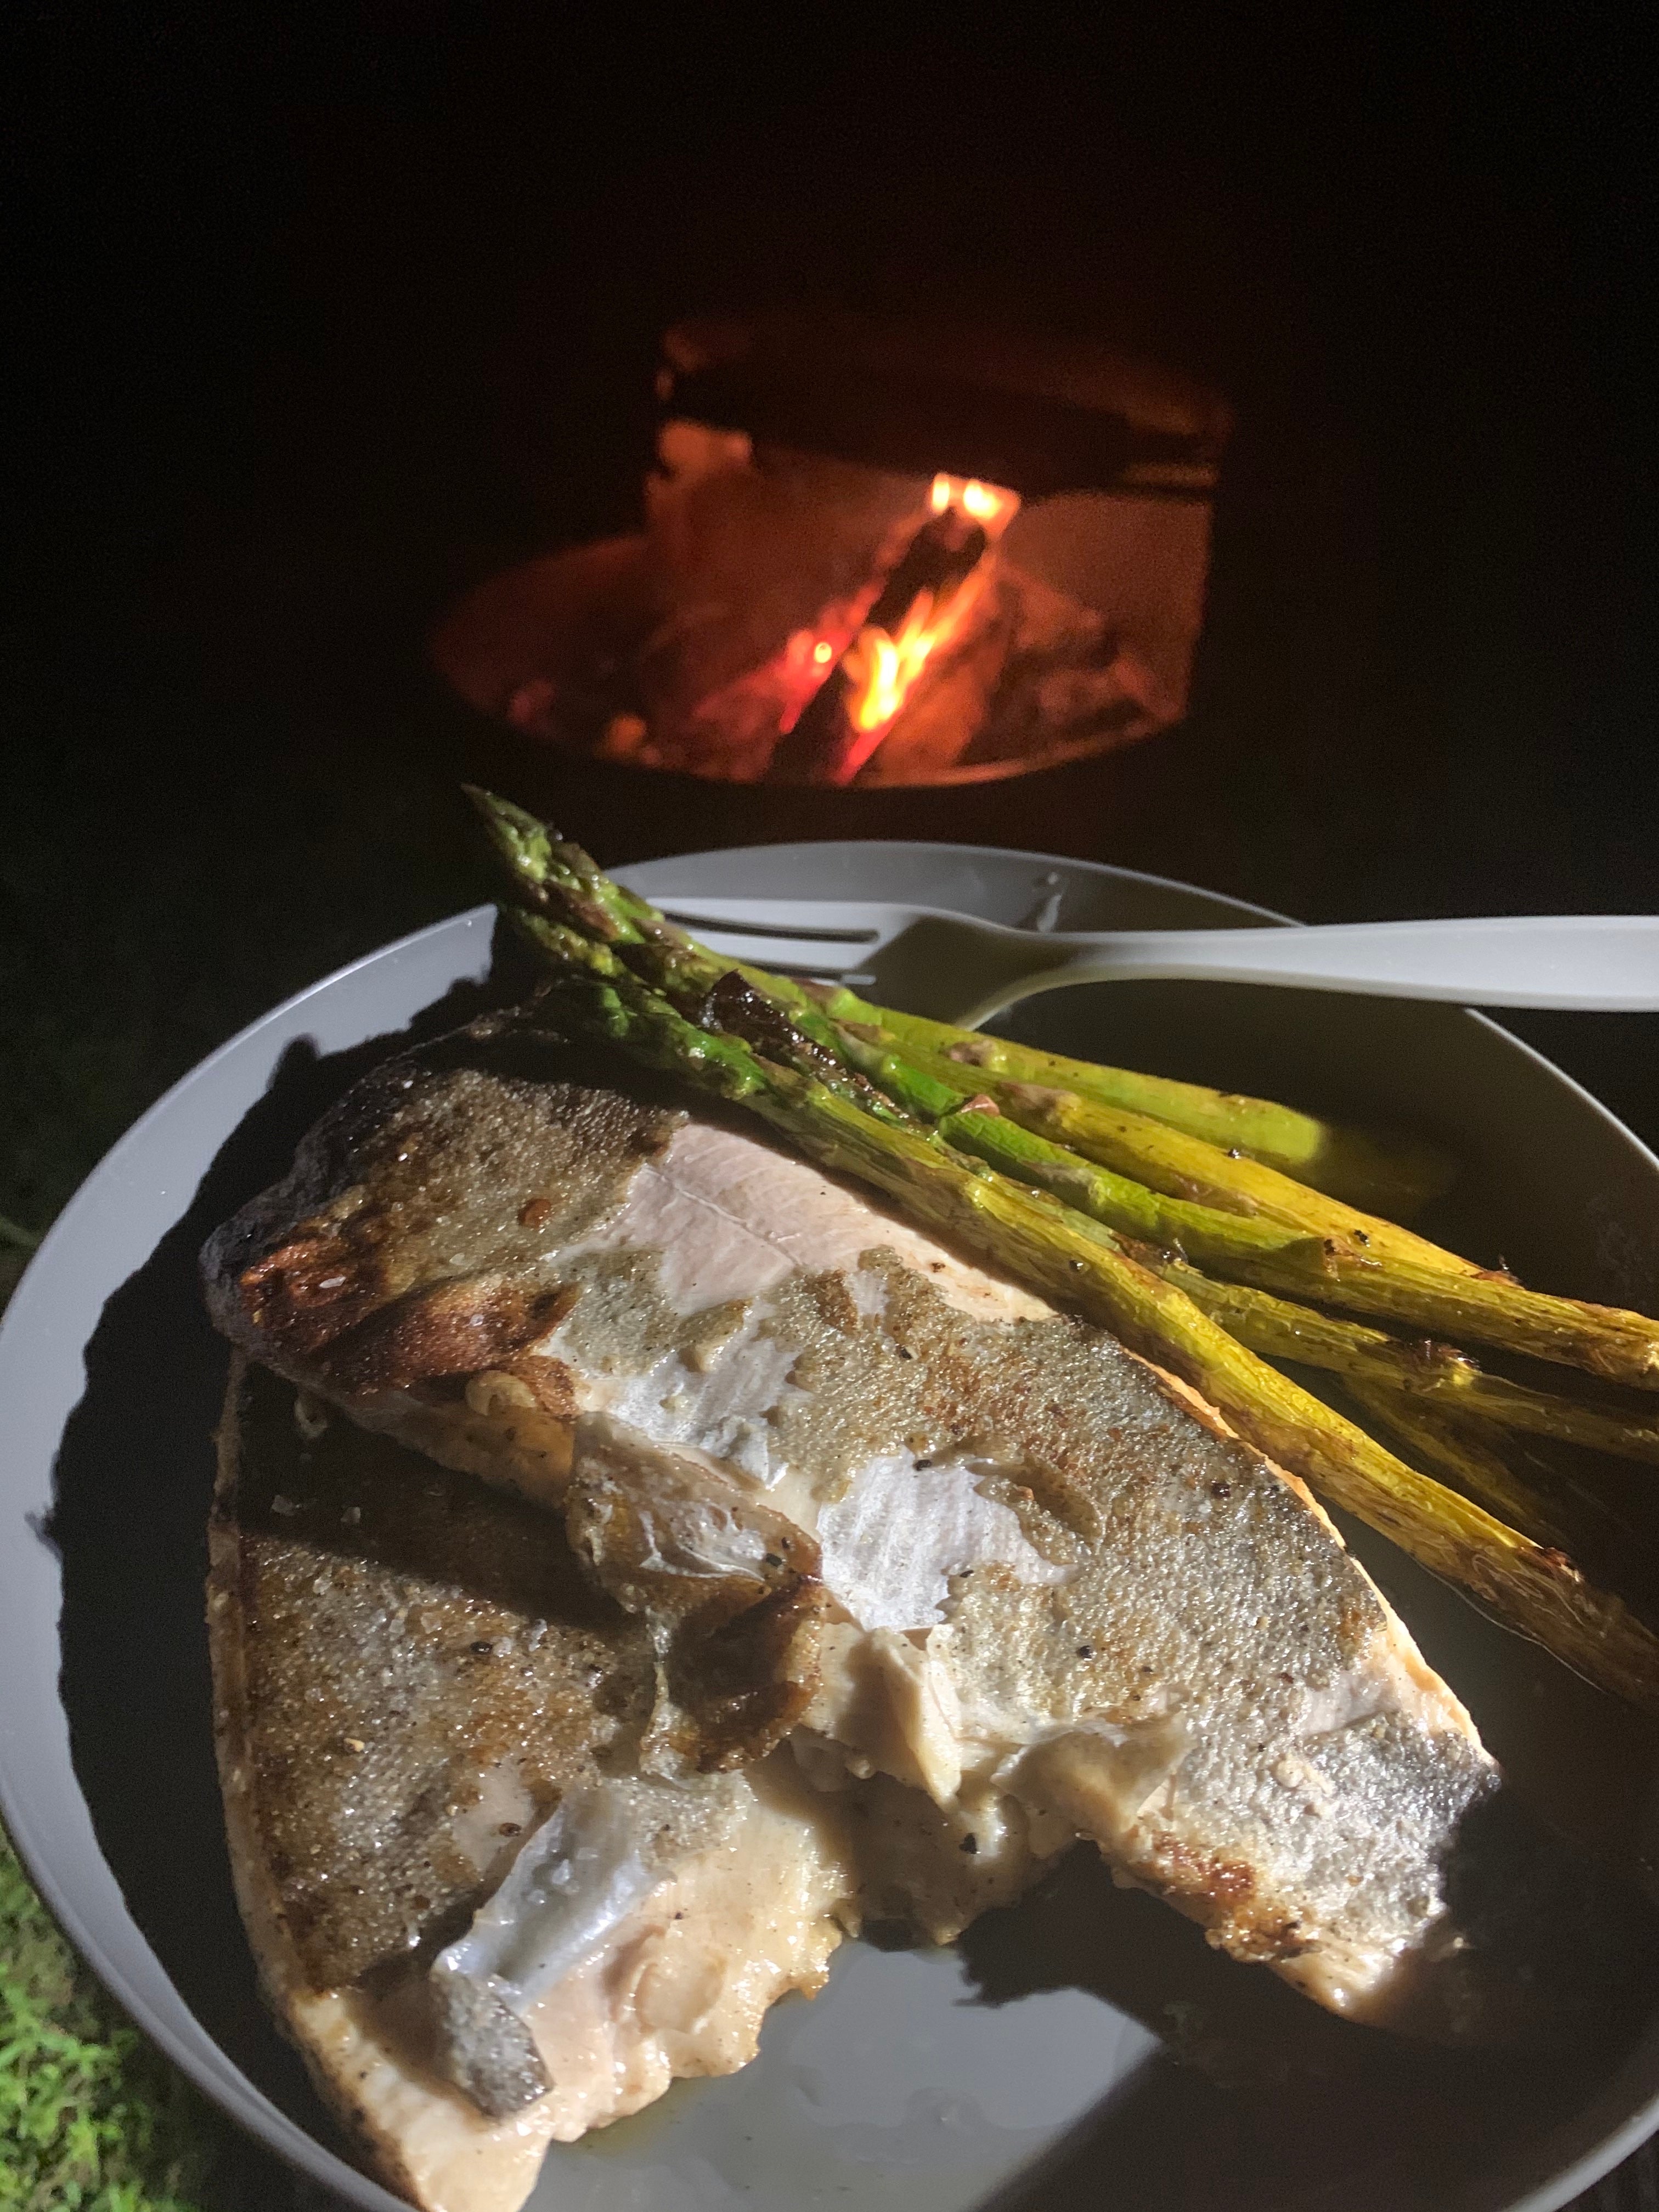 Can’t go wrong with fresh food cooked on the fire 😉